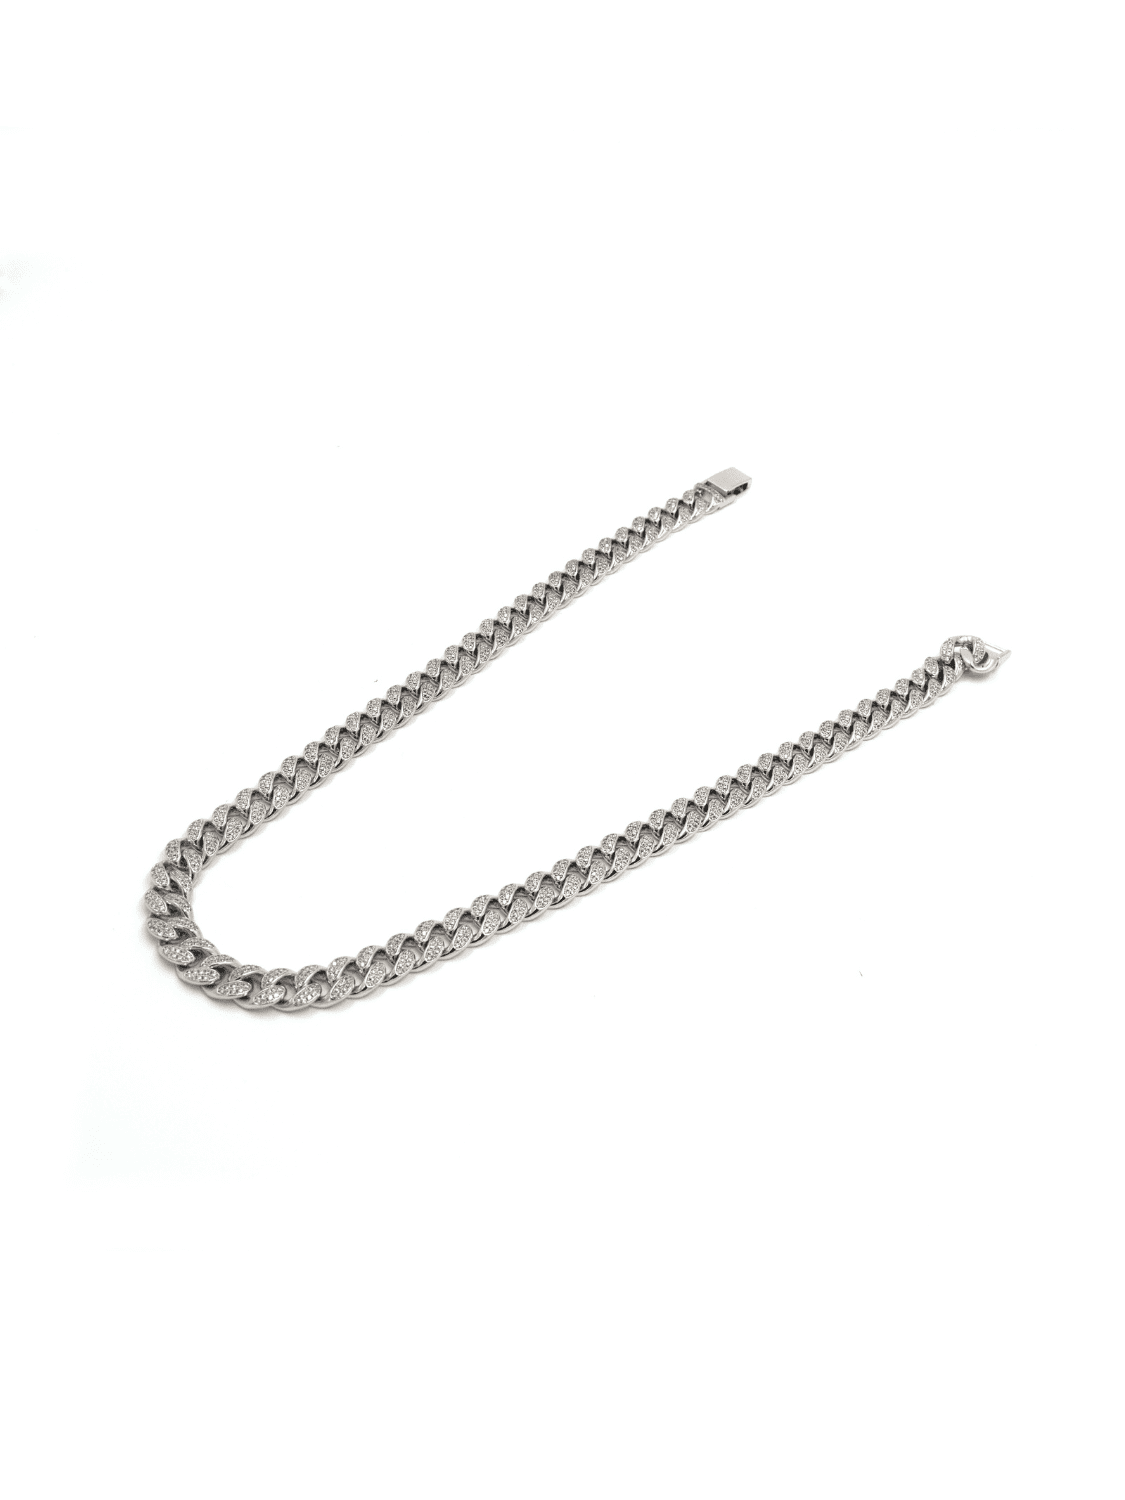 Road Rider Silver Plated Chain - QUEENS JEWELS